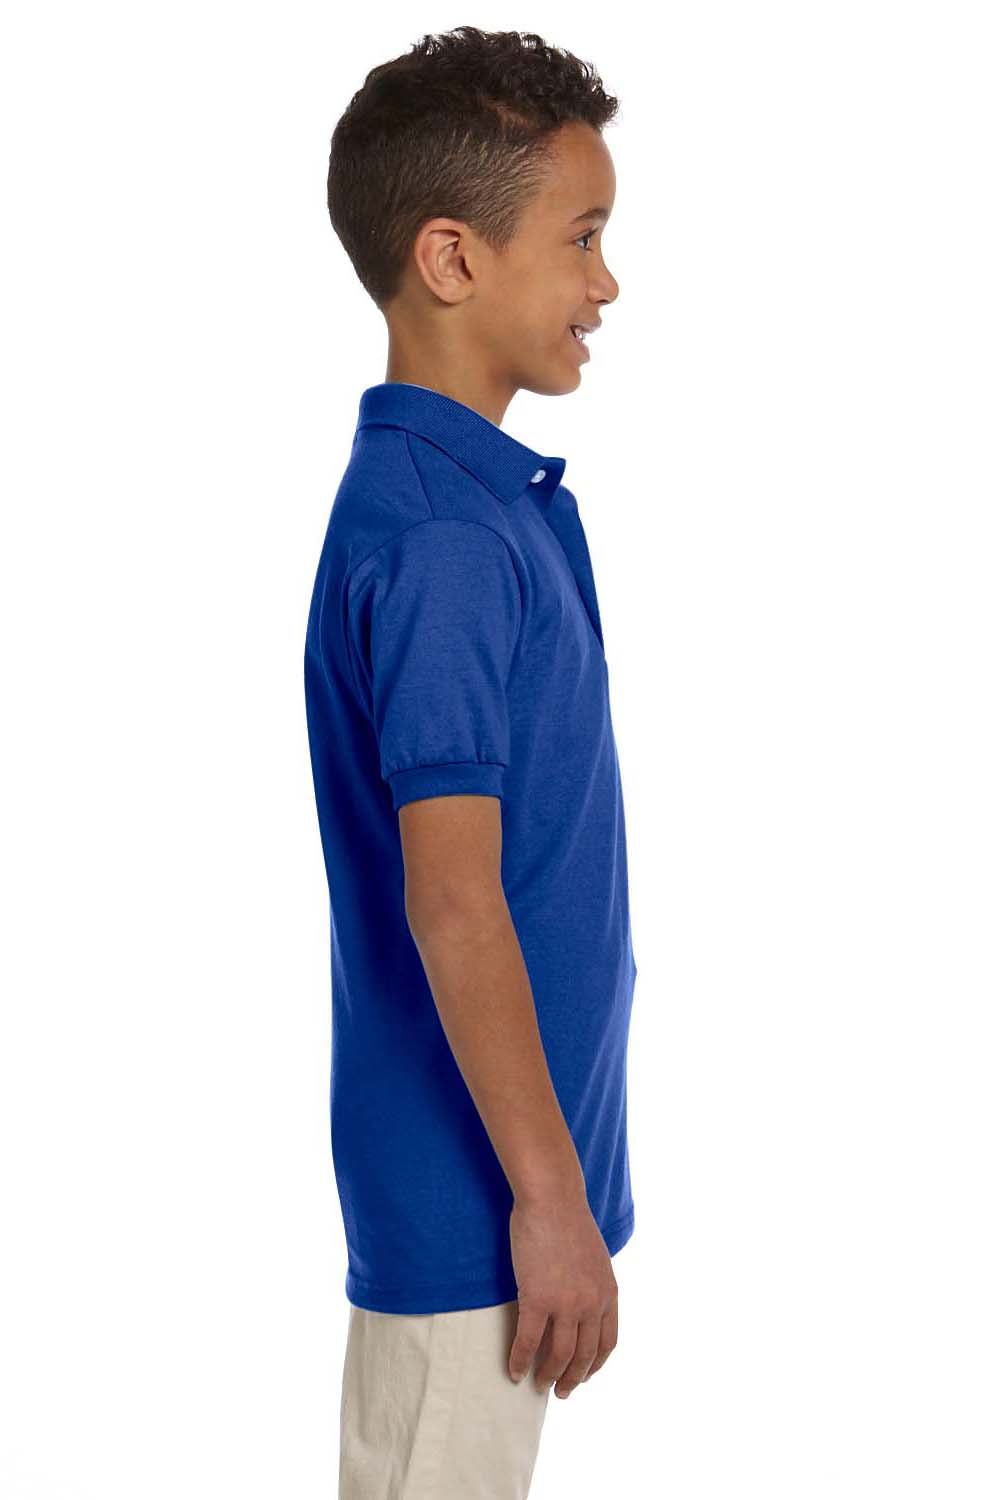 Jerzees 437Y Youth SpotShield Stain Resistant Short Sleeve Polo Shirt Royal Blue Side